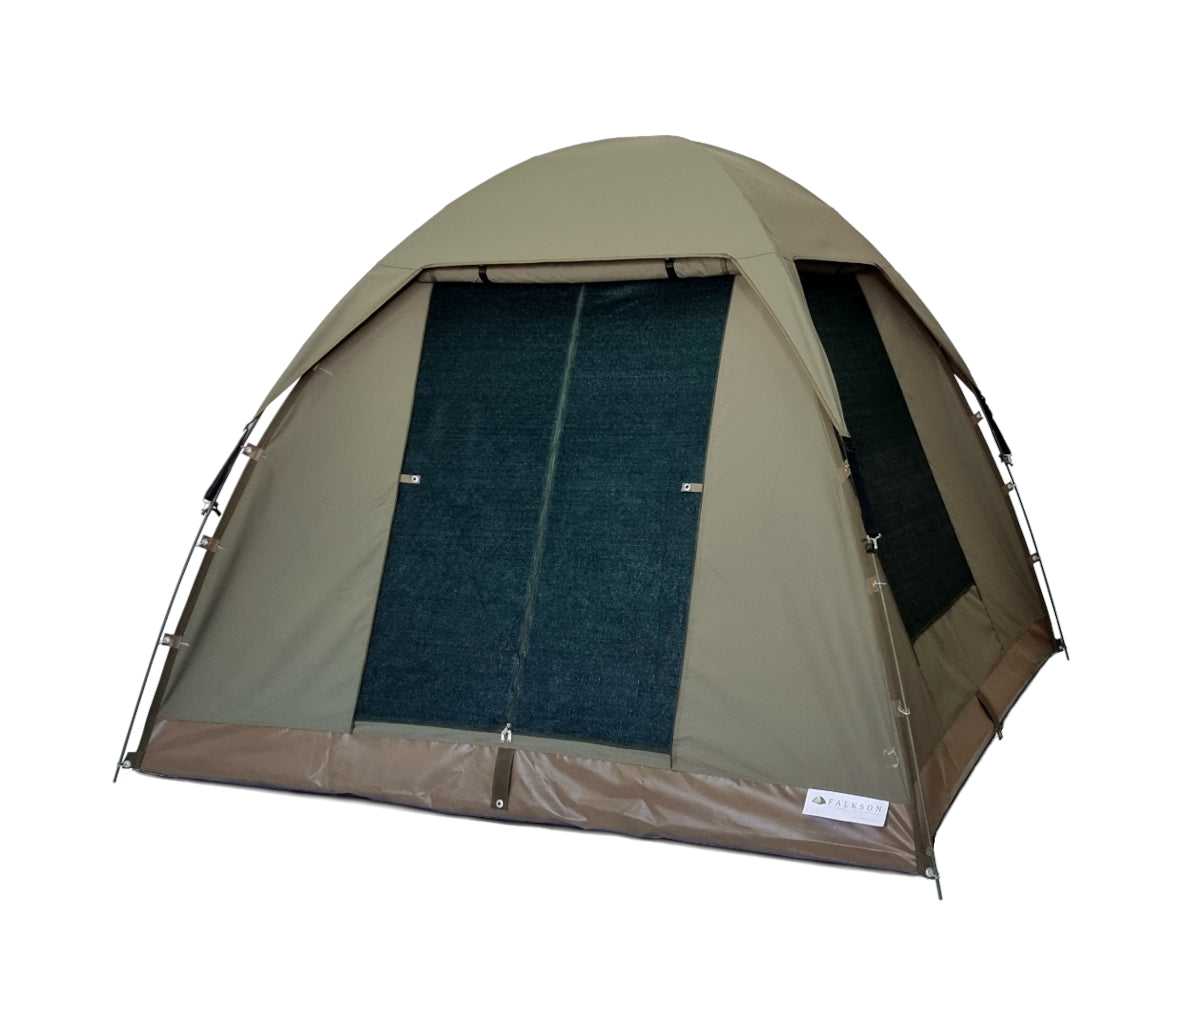 FALKSON Adventurer 5 | 4 person tent | 3x3m Bow tent | All weather canvas camping tent